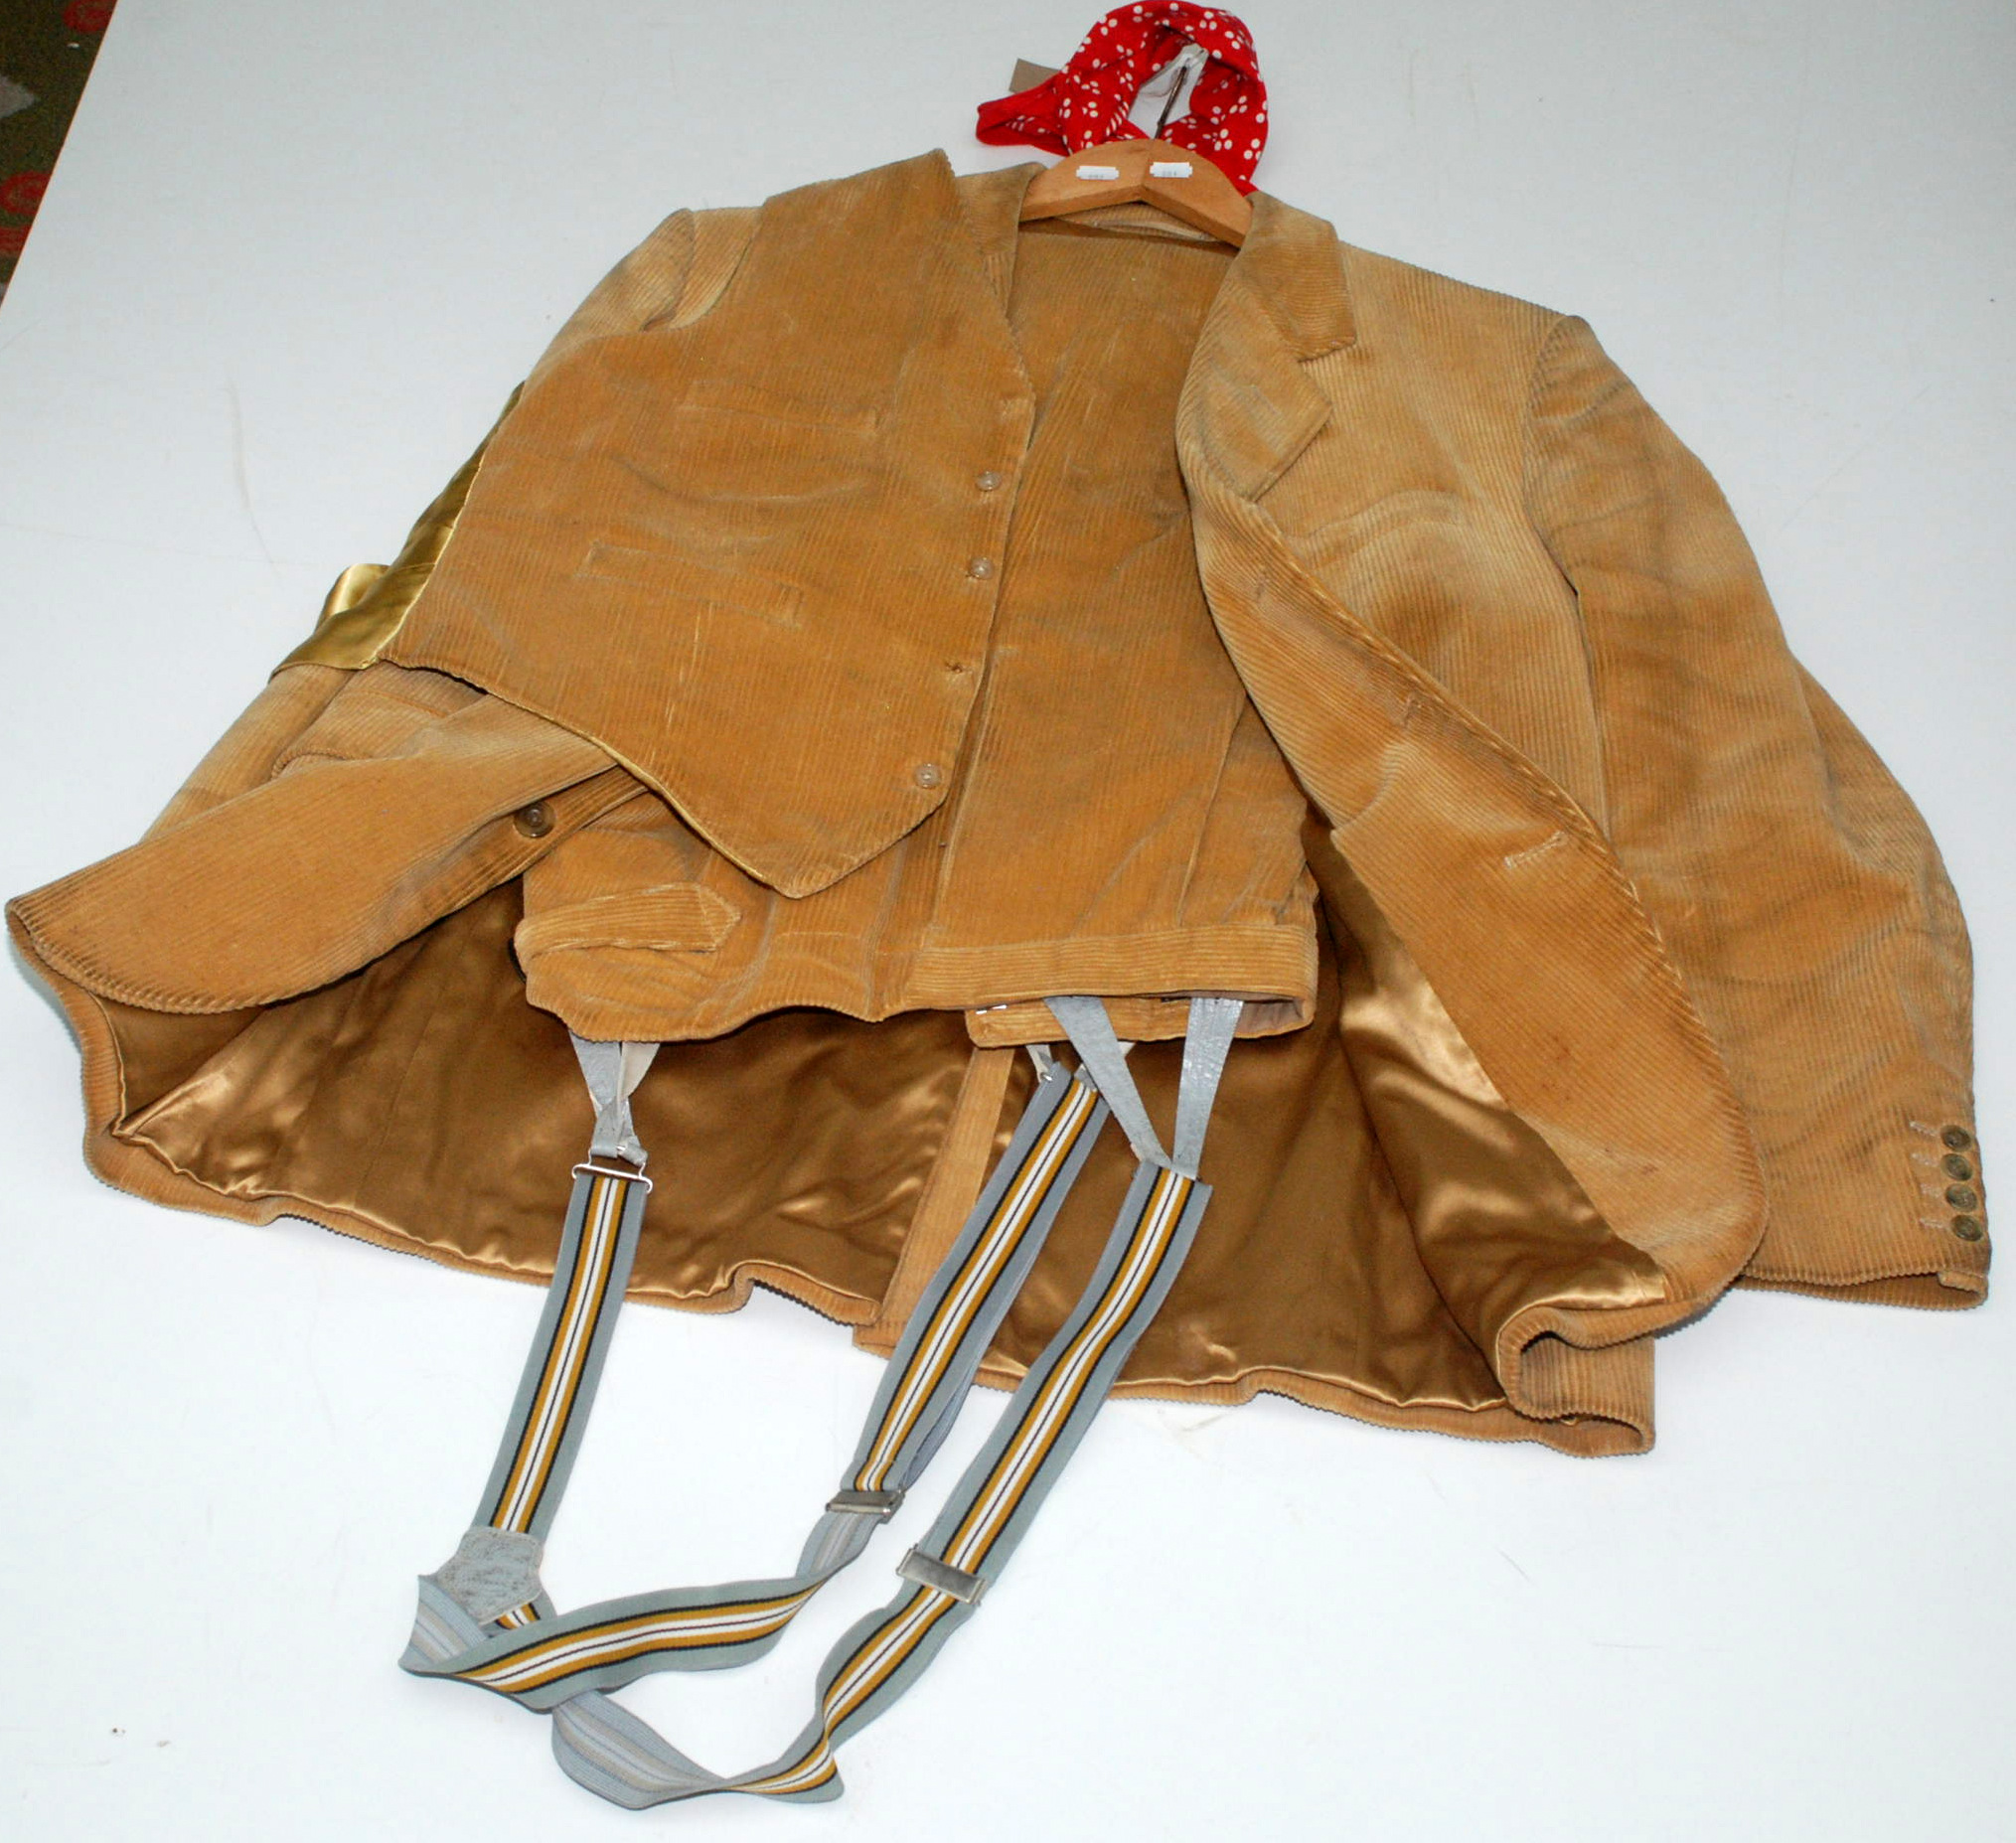 Chuderoy jacket, waistcoat and breeches. These were the property of Dudley Sutton the actor, in